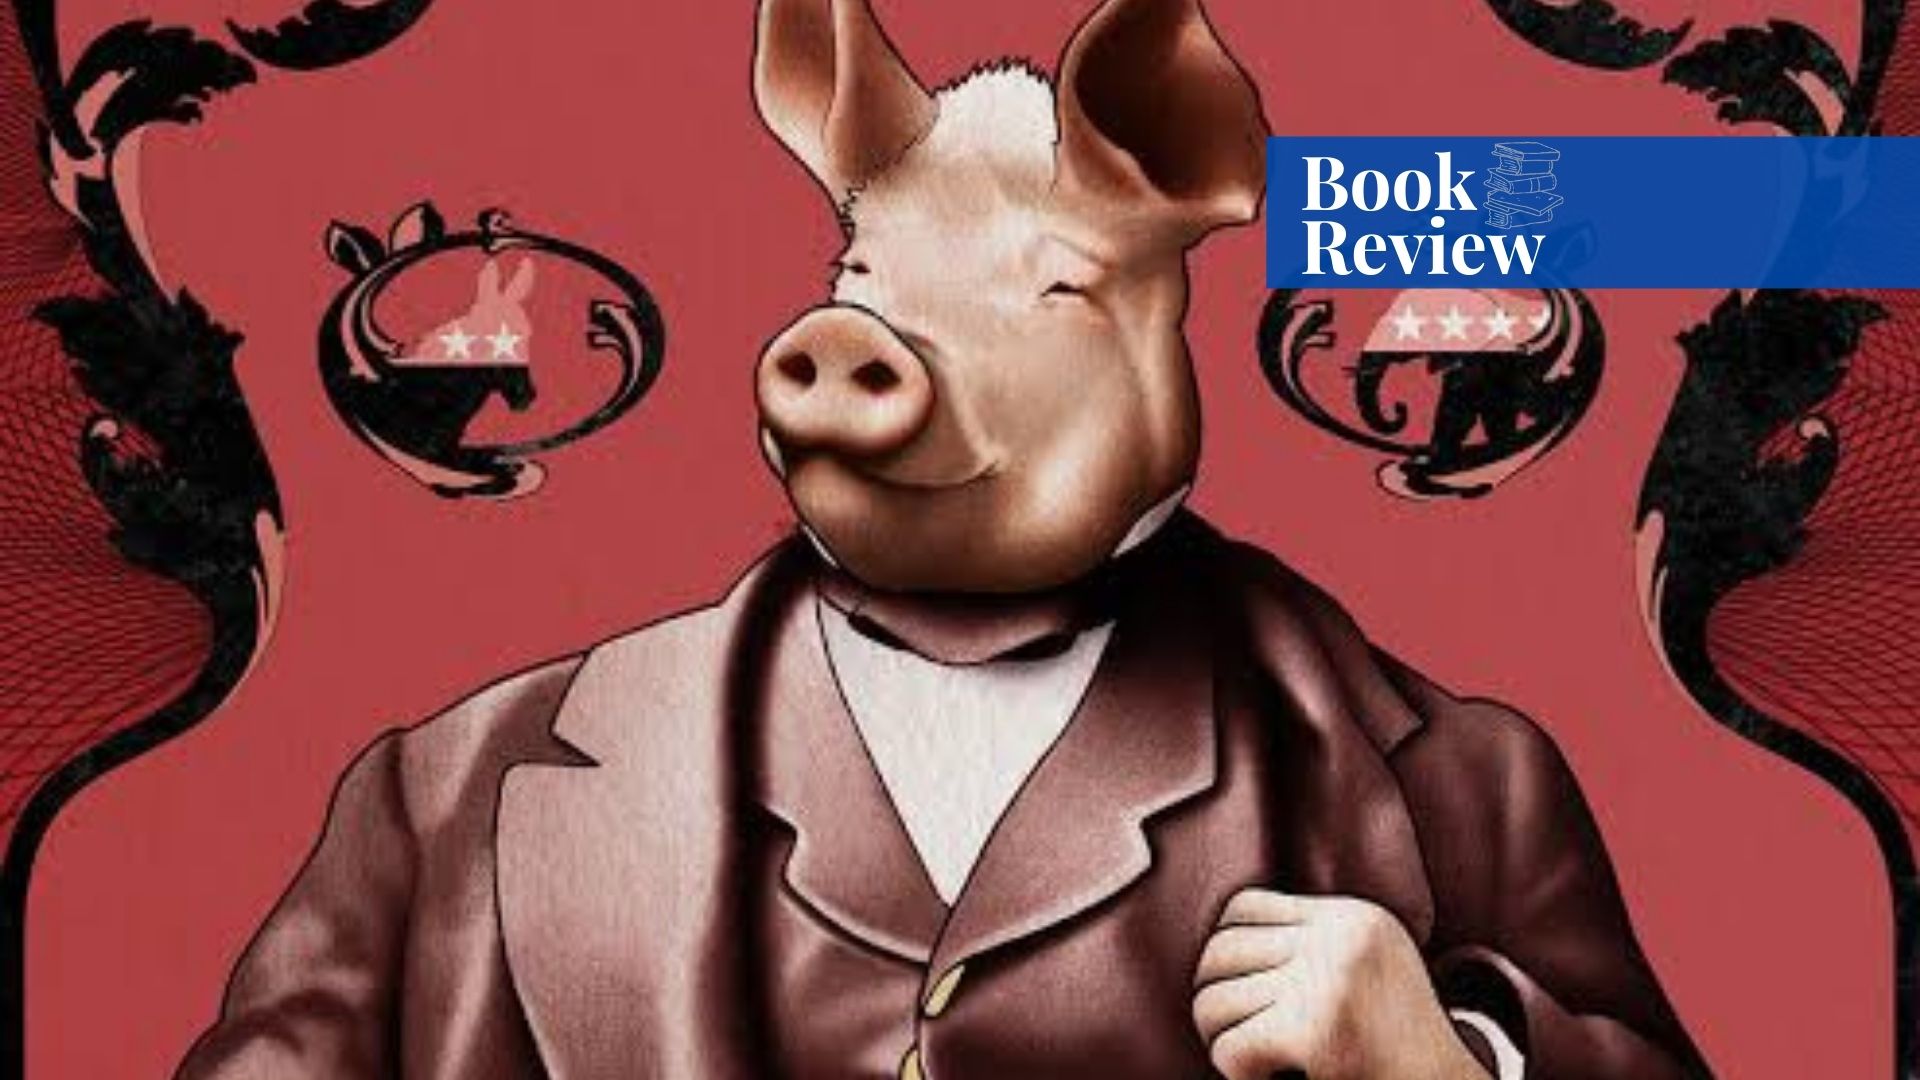 Animal Farm by George Orwell (Book Review) - Paradigm Shift